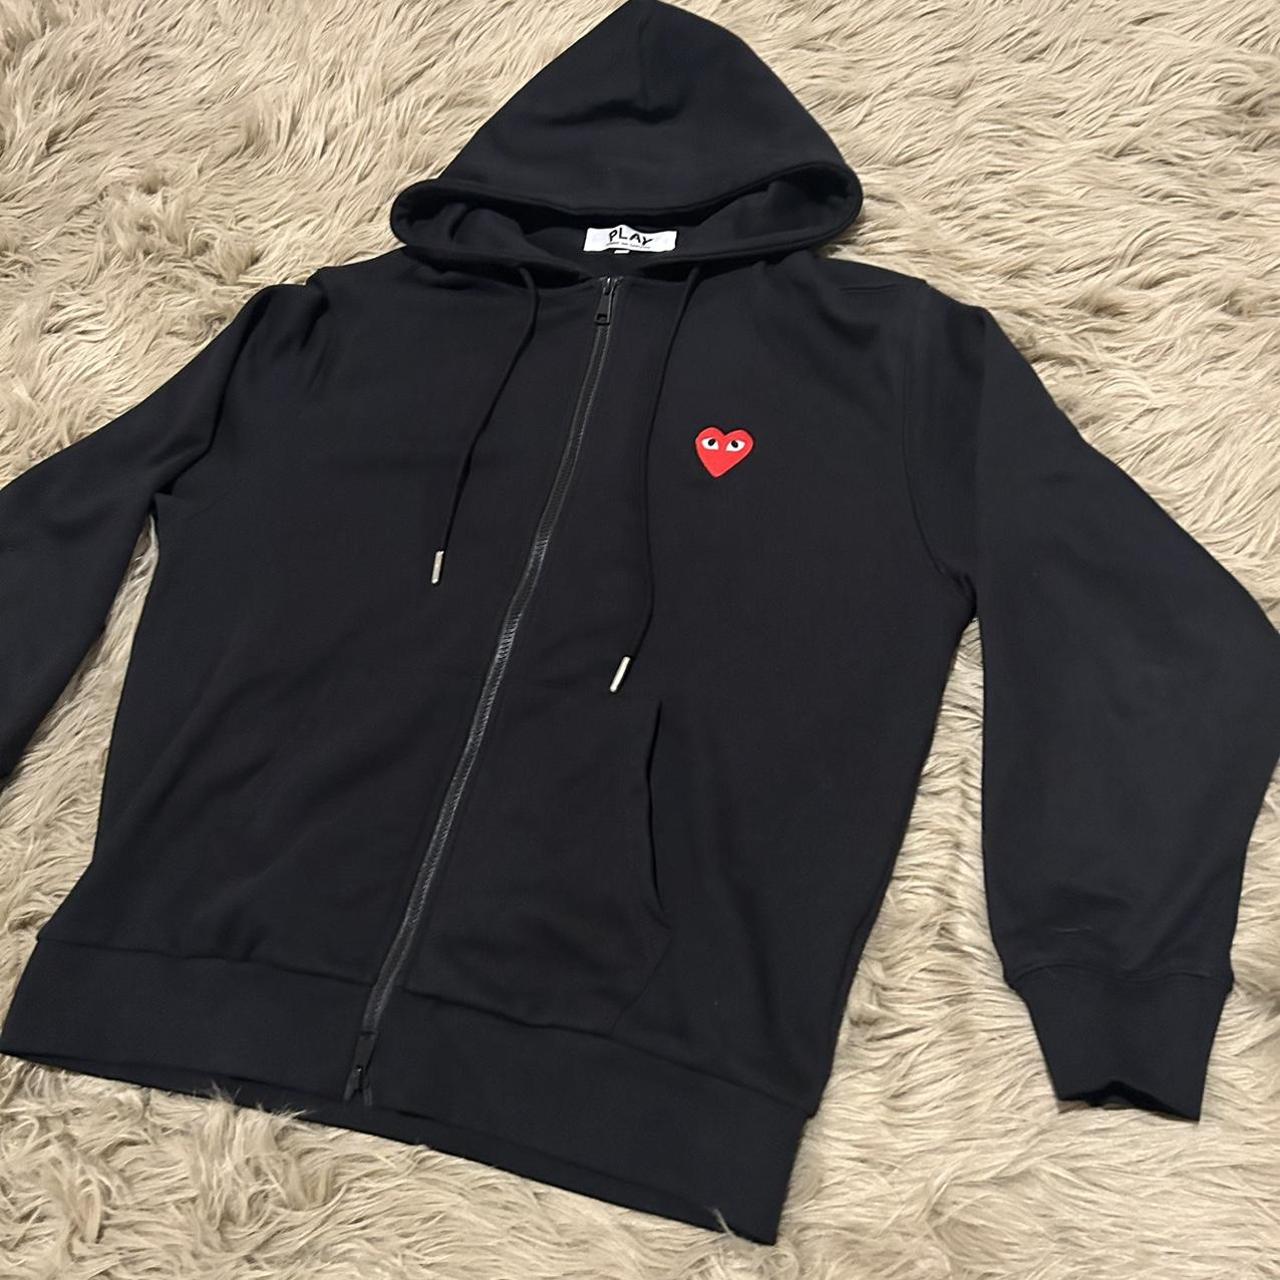 Comme des Garçons Play Men's Black and Red Hoodie